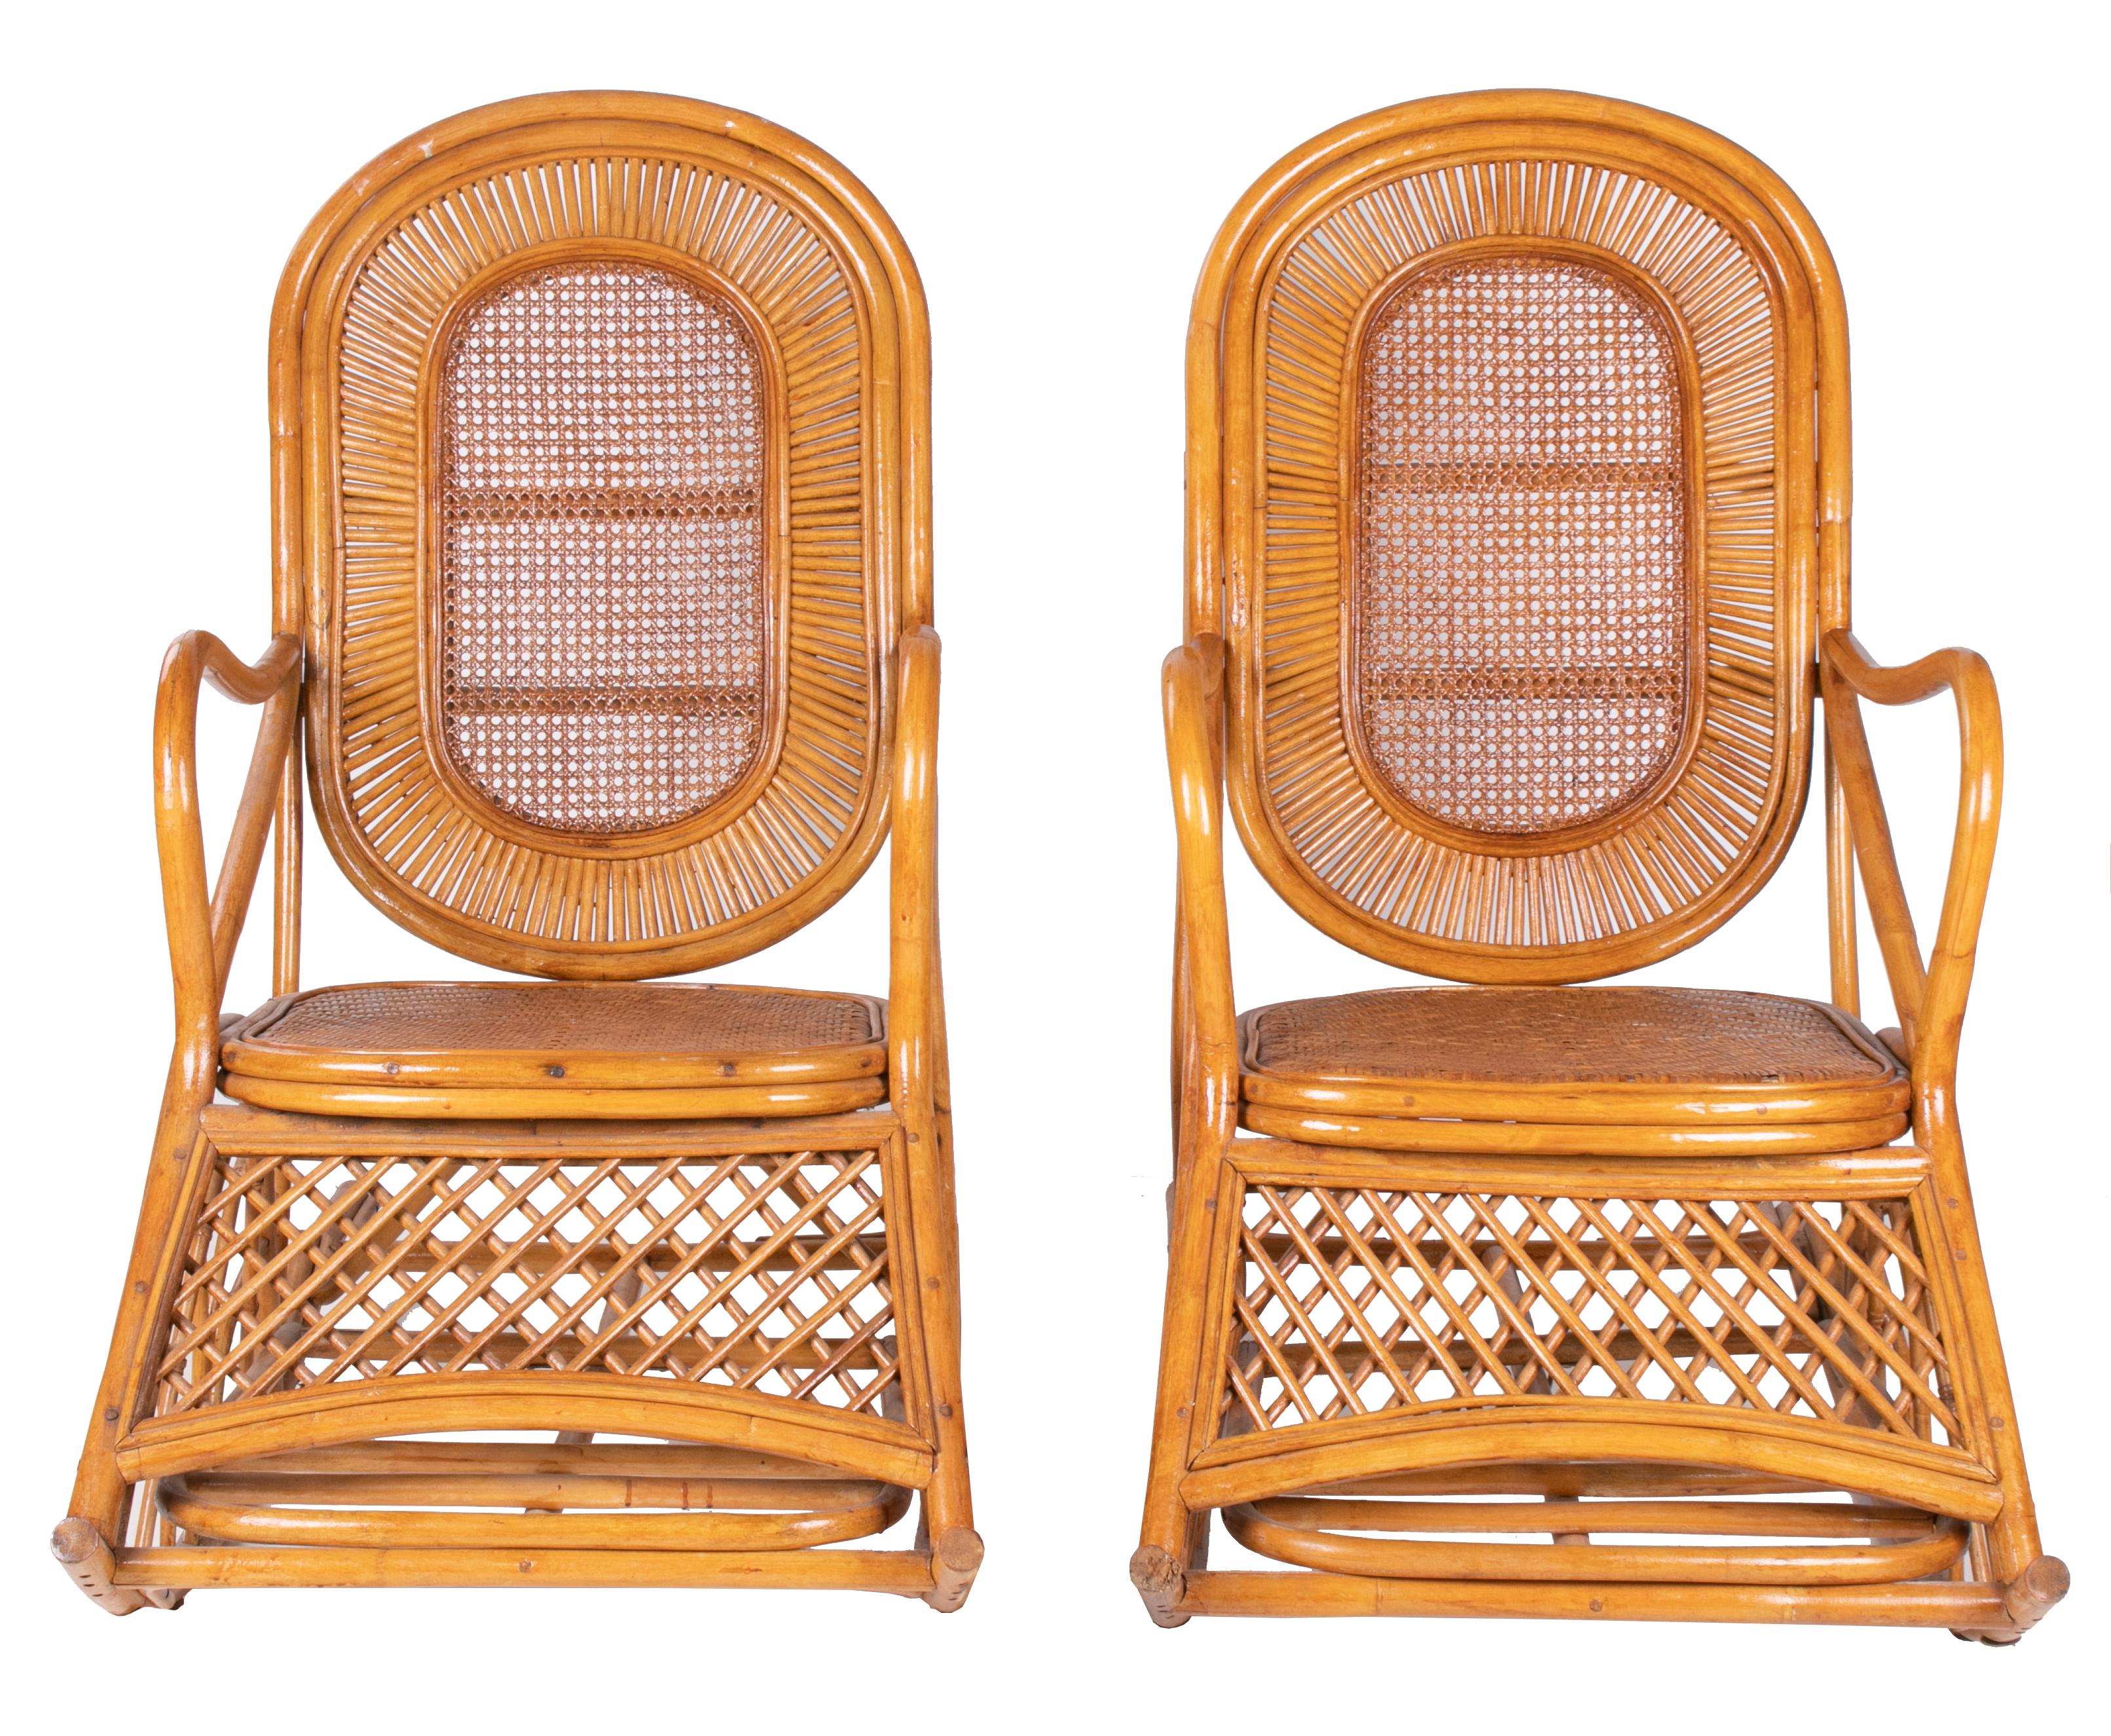 1970s Spanish pair of wood and bamboo rocking chairs with foot rests.